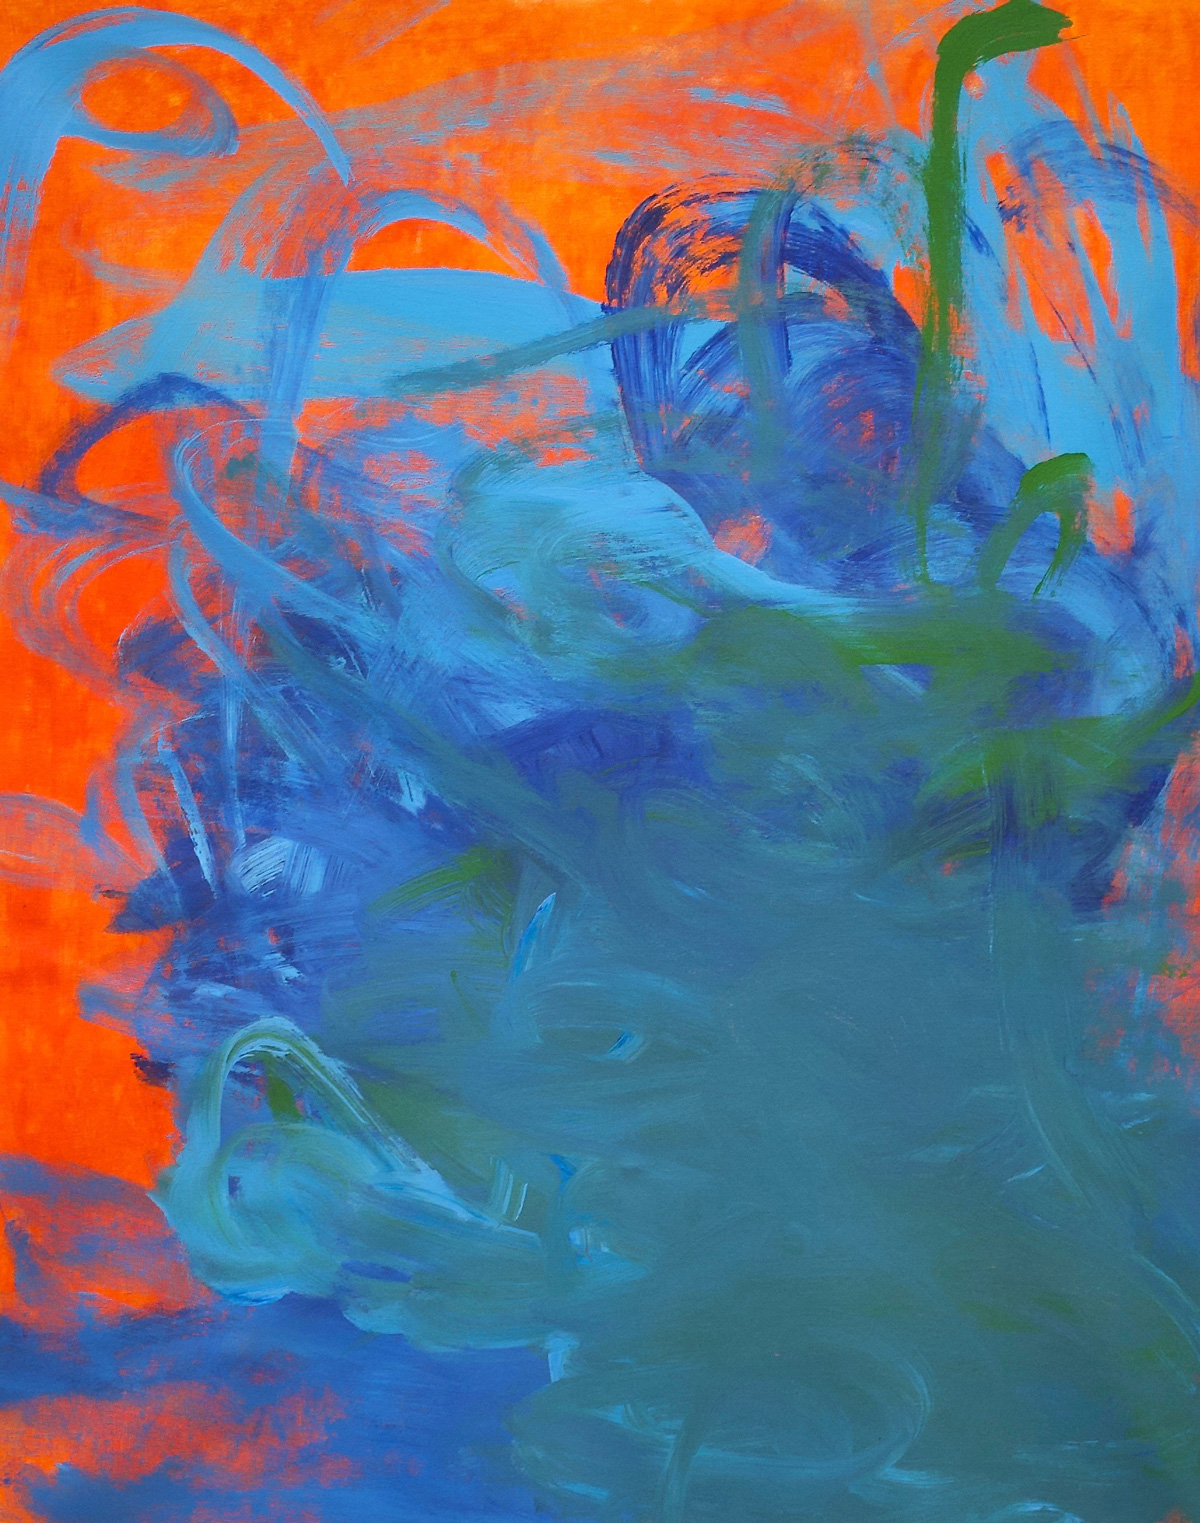 Orange background with a concentration of blue-green brushstrokes moving out from the bottom right of the canvas.